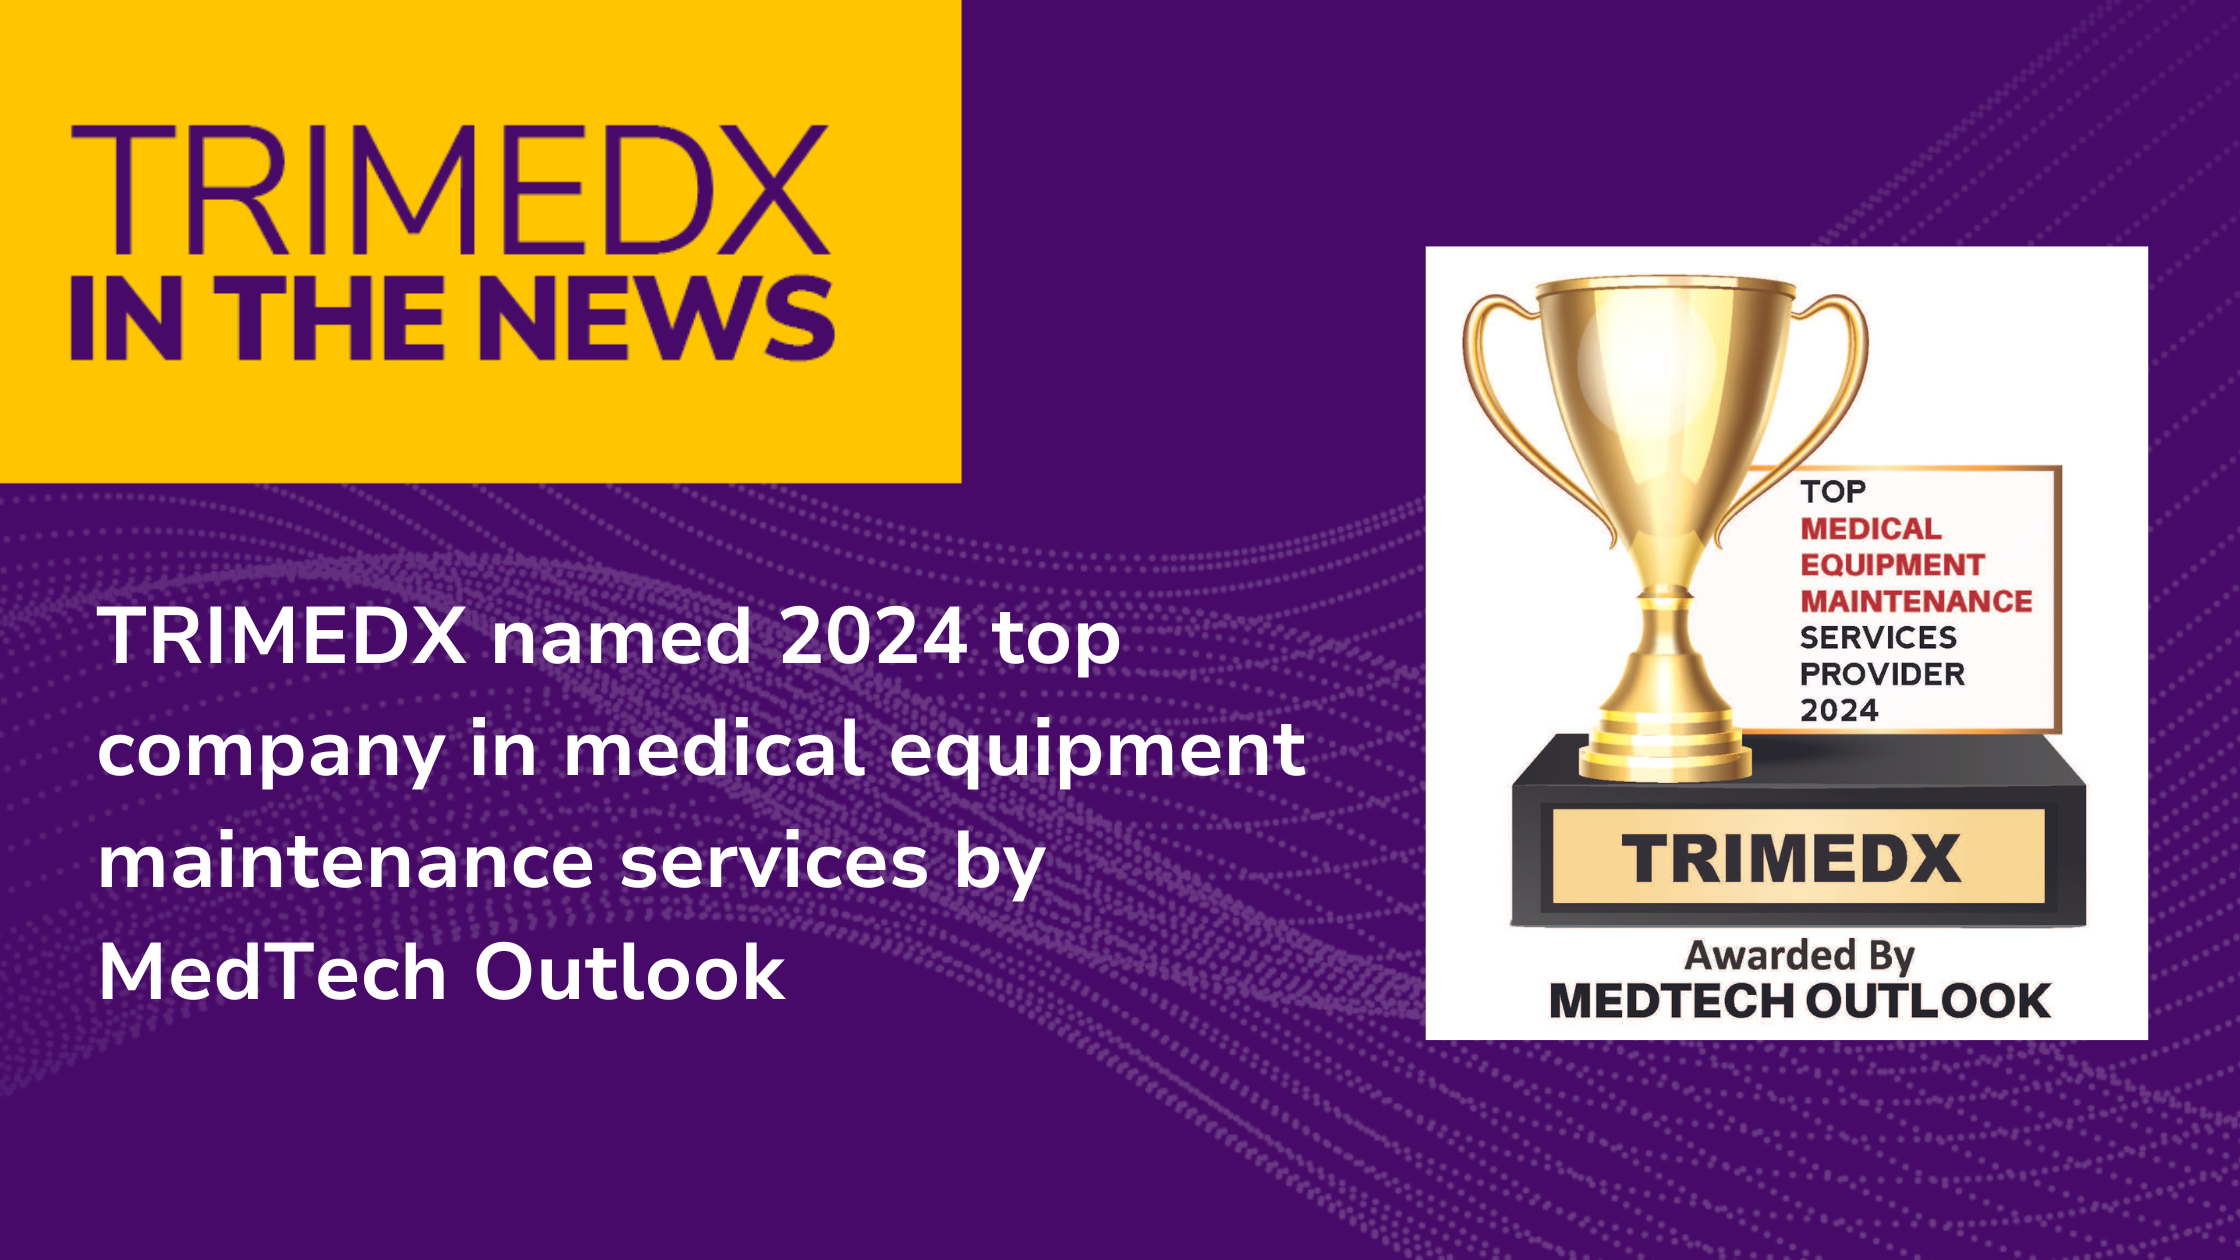 TRIMEDX named 2024 top company in medical equipment maintenance services by MedTech Outlook